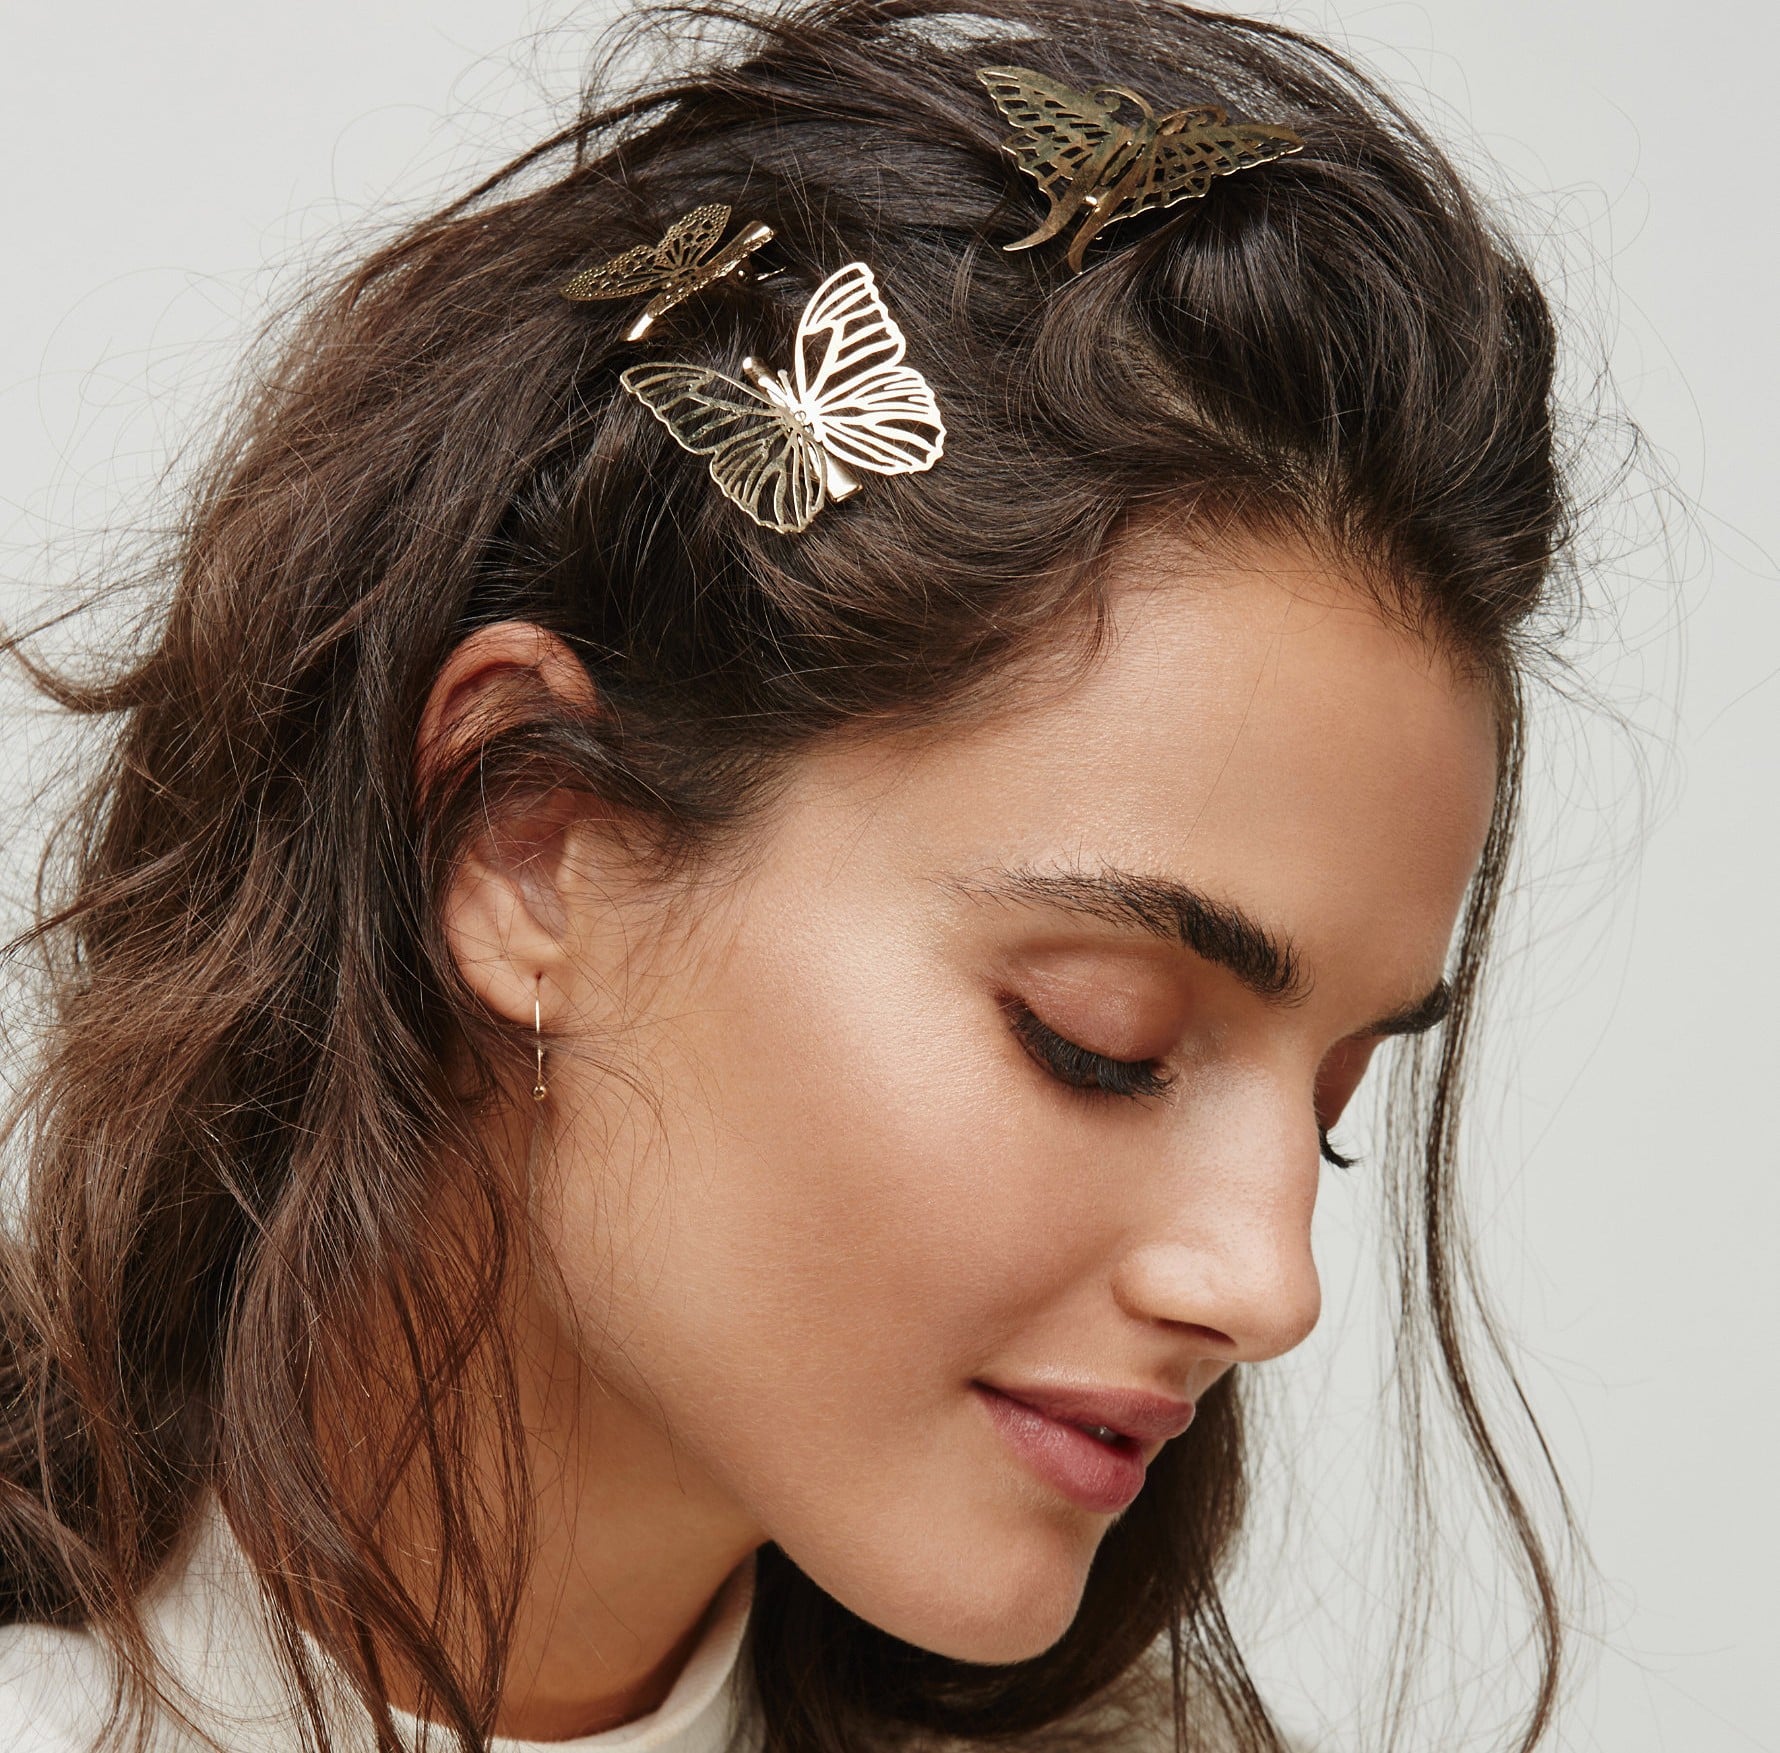 Barrettes and hair clips are the '90s accessory celebs love